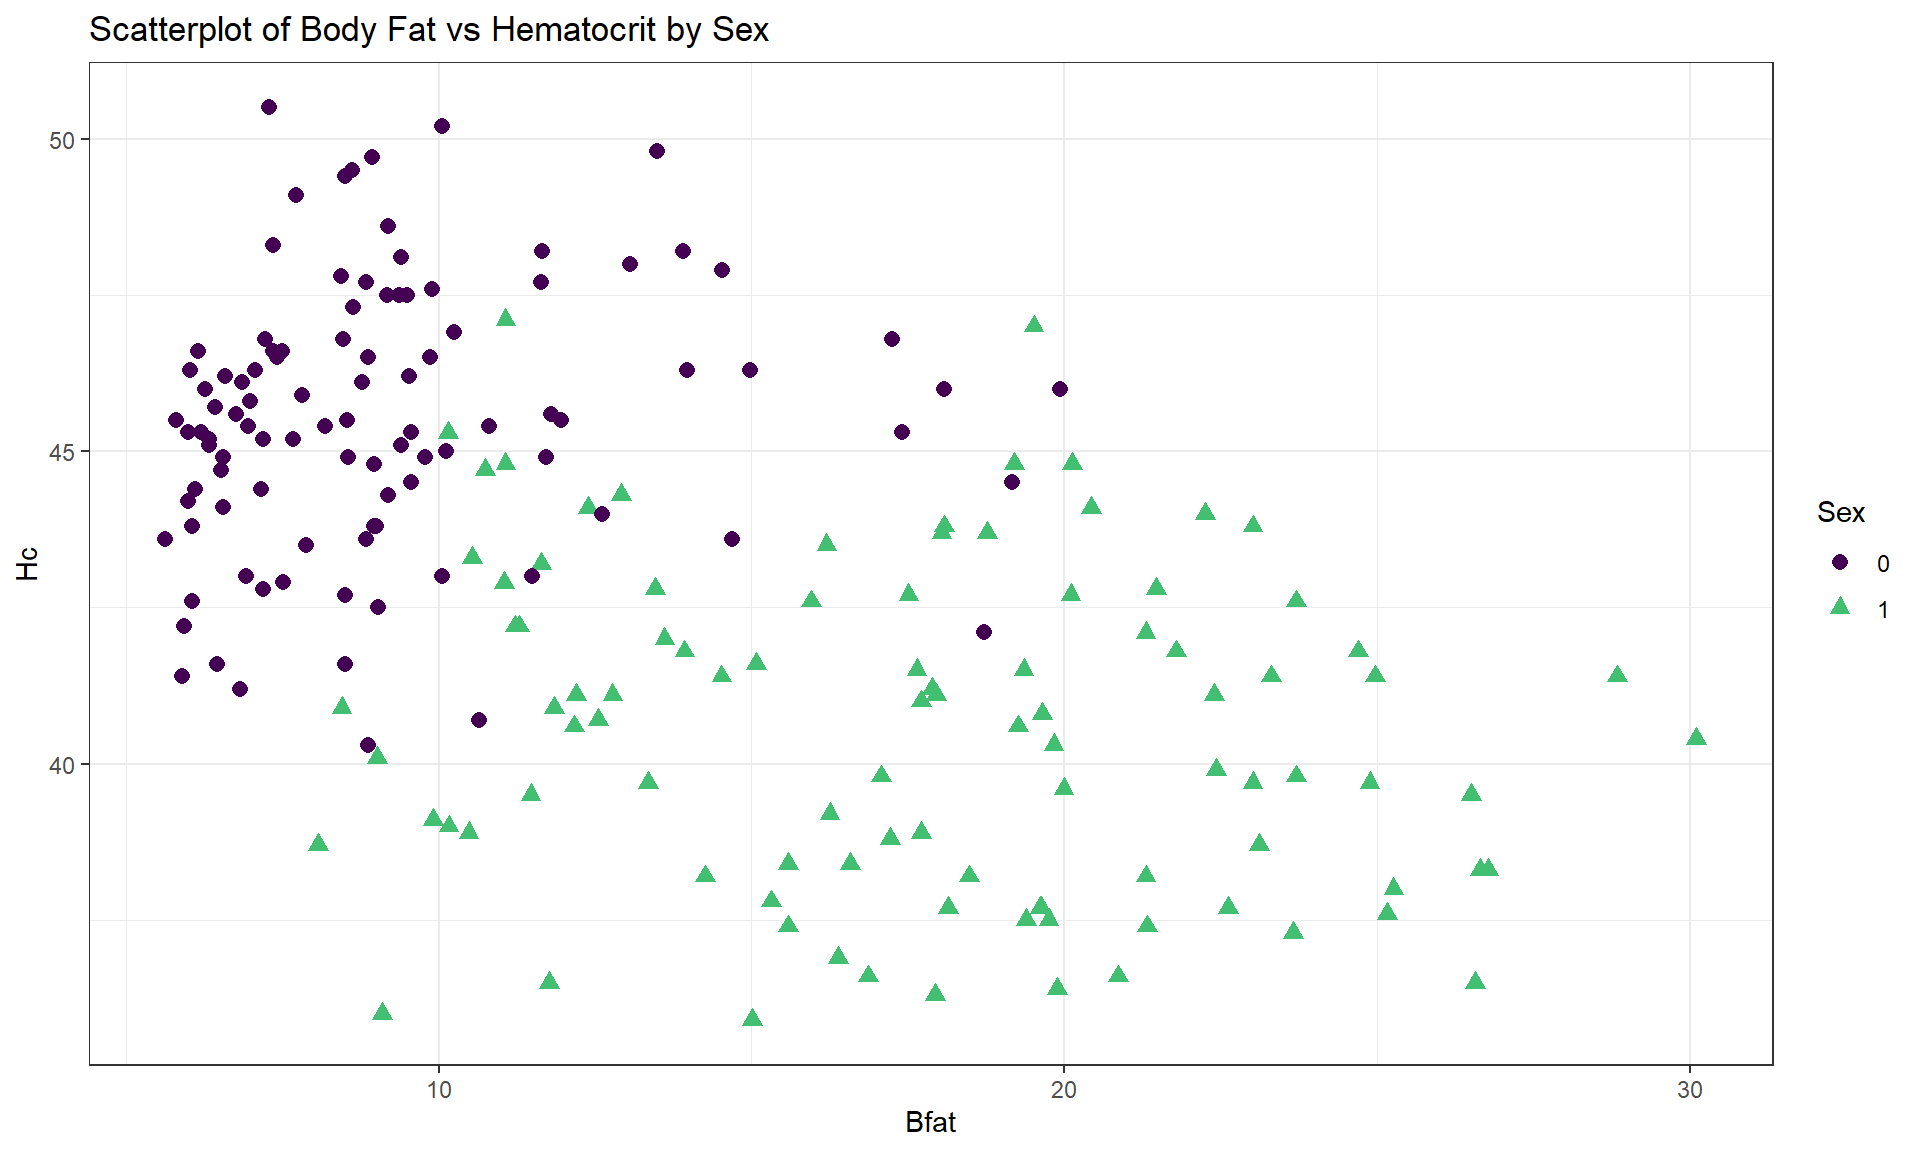 Scatterplot of athlete’s body fat and hematocrit by sex of athletes. Males were coded as 0s and females as 1s.